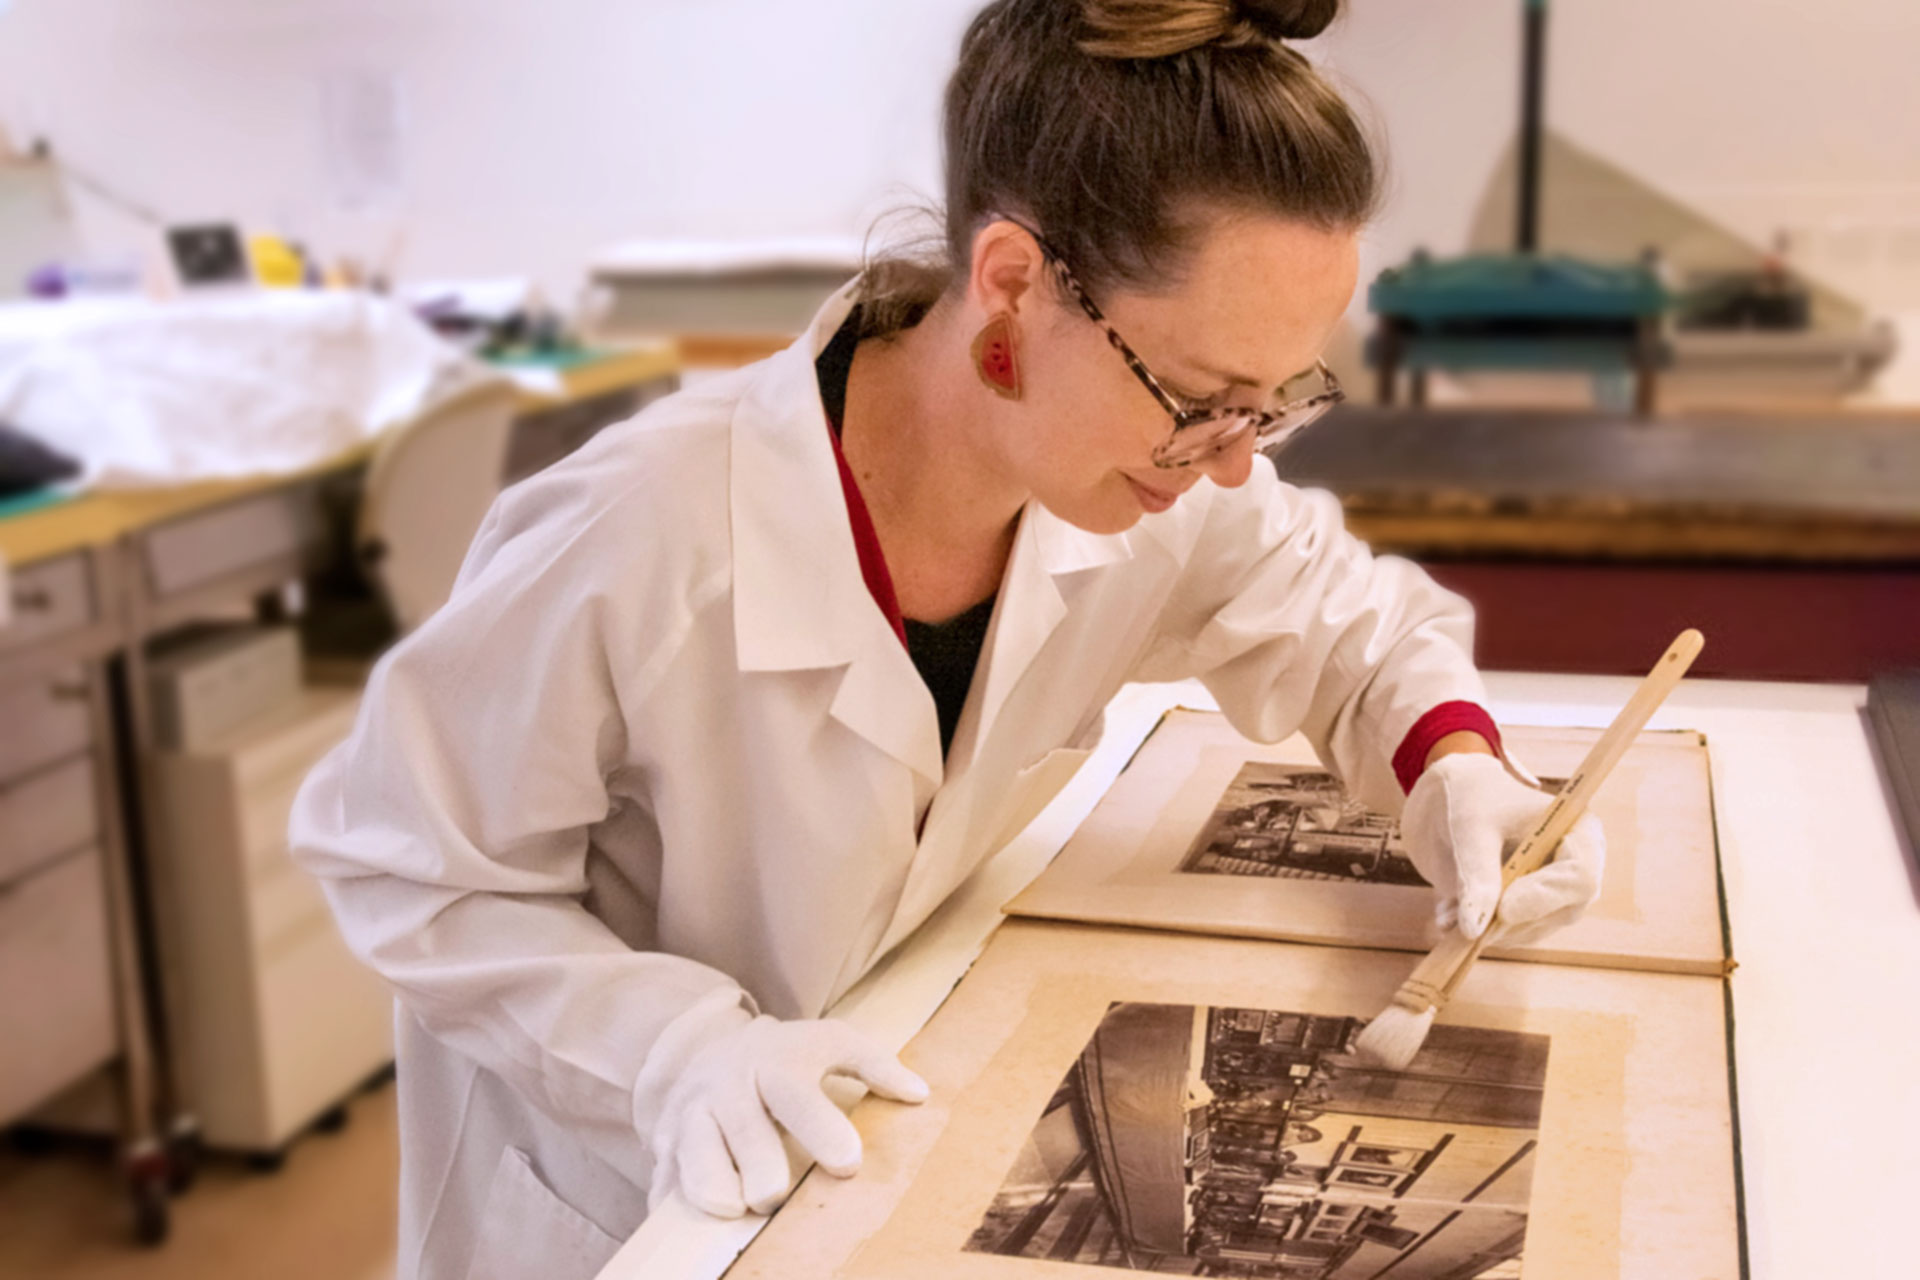 State Library staff member working in a laboratory gently brushing an old photograph.  